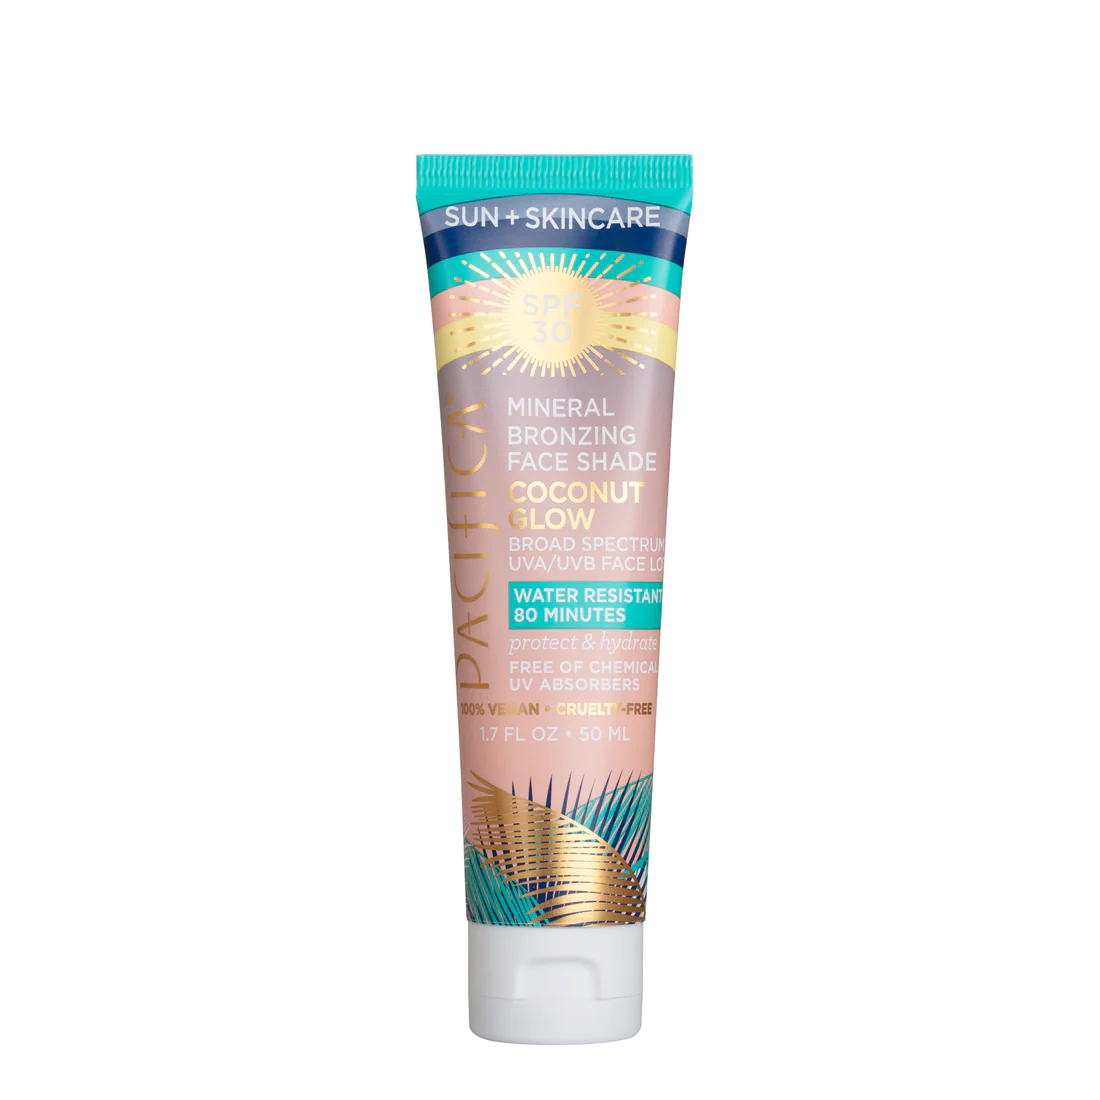 Pacifica Beauty Mineral Bronzing Face Shade Coconut Glow SPF 30